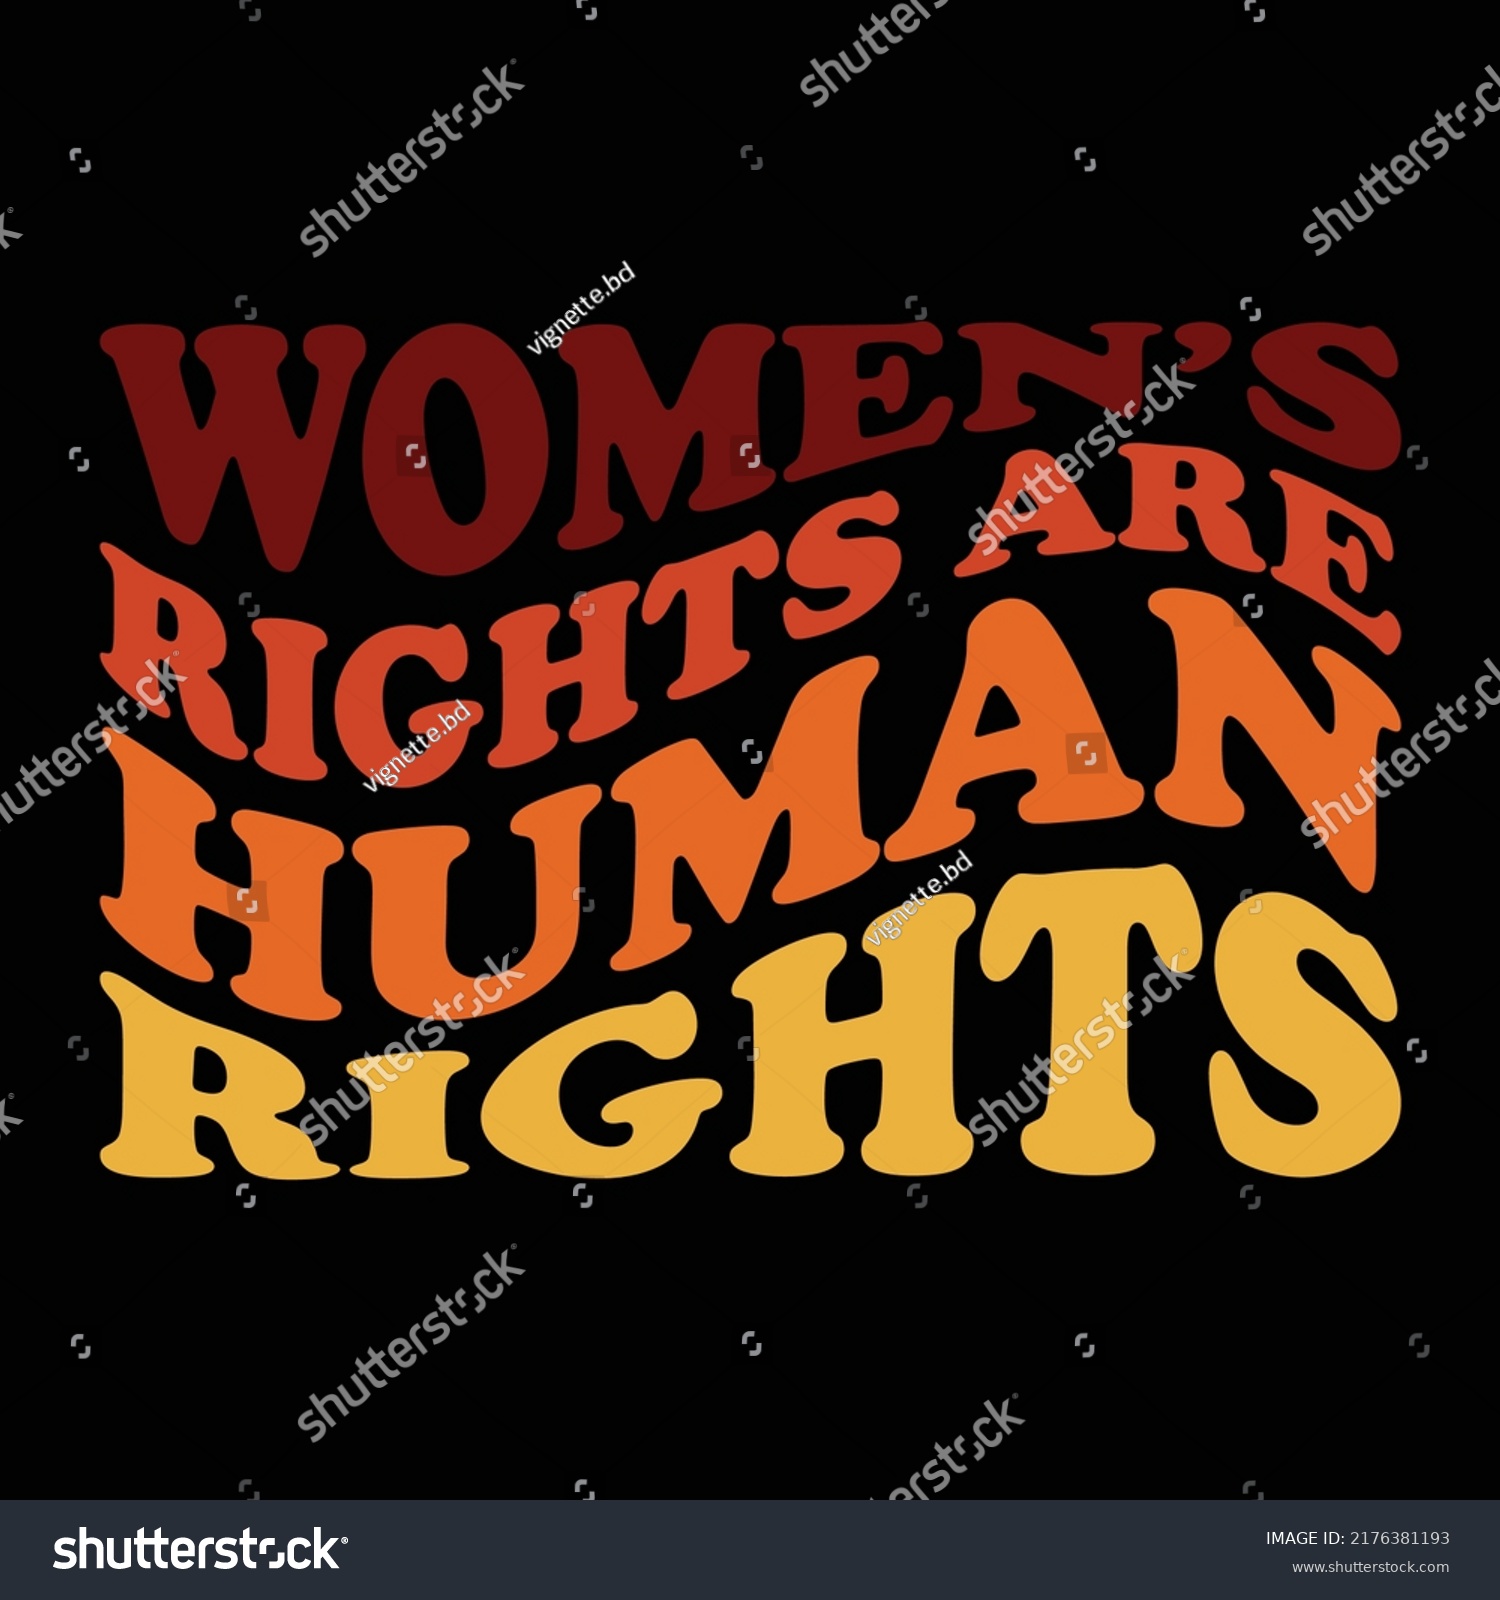 Womens Rights Human Rights Feminist Shirt Stock Vector Royalty Free 2176381193 Shutterstock 4525